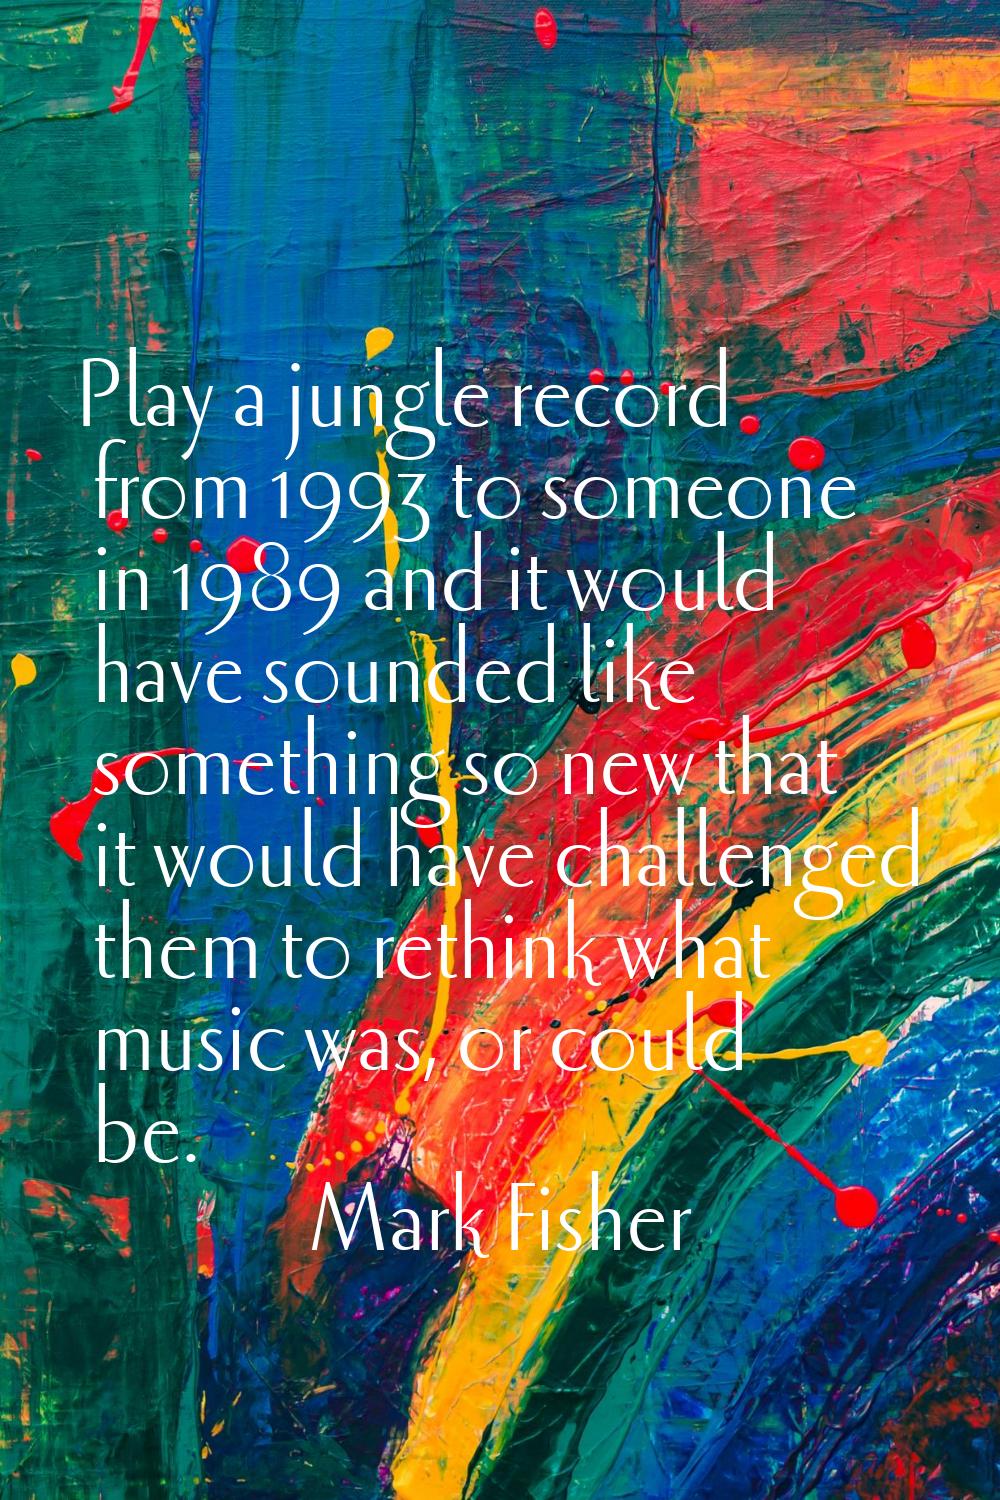 Play a jungle record from 1993 to someone in 1989 and it would have sounded like something so new t